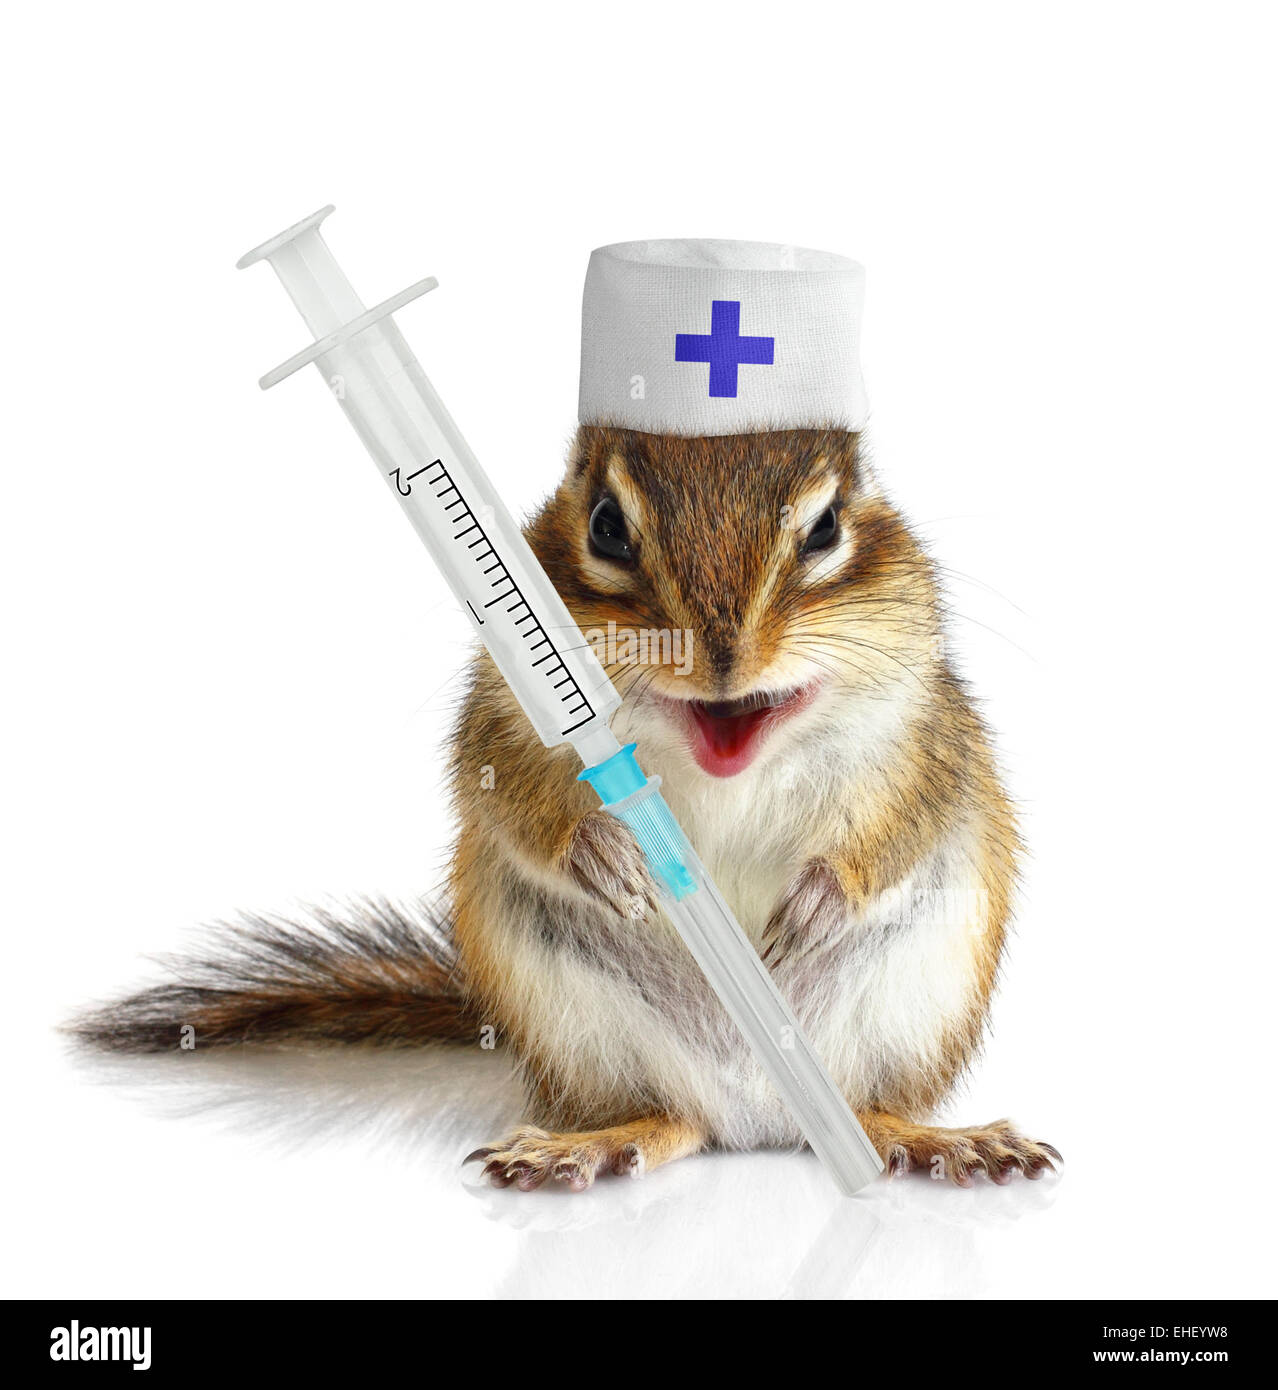 Funny chipmunk veterinarian with syringes on white Stock Photo